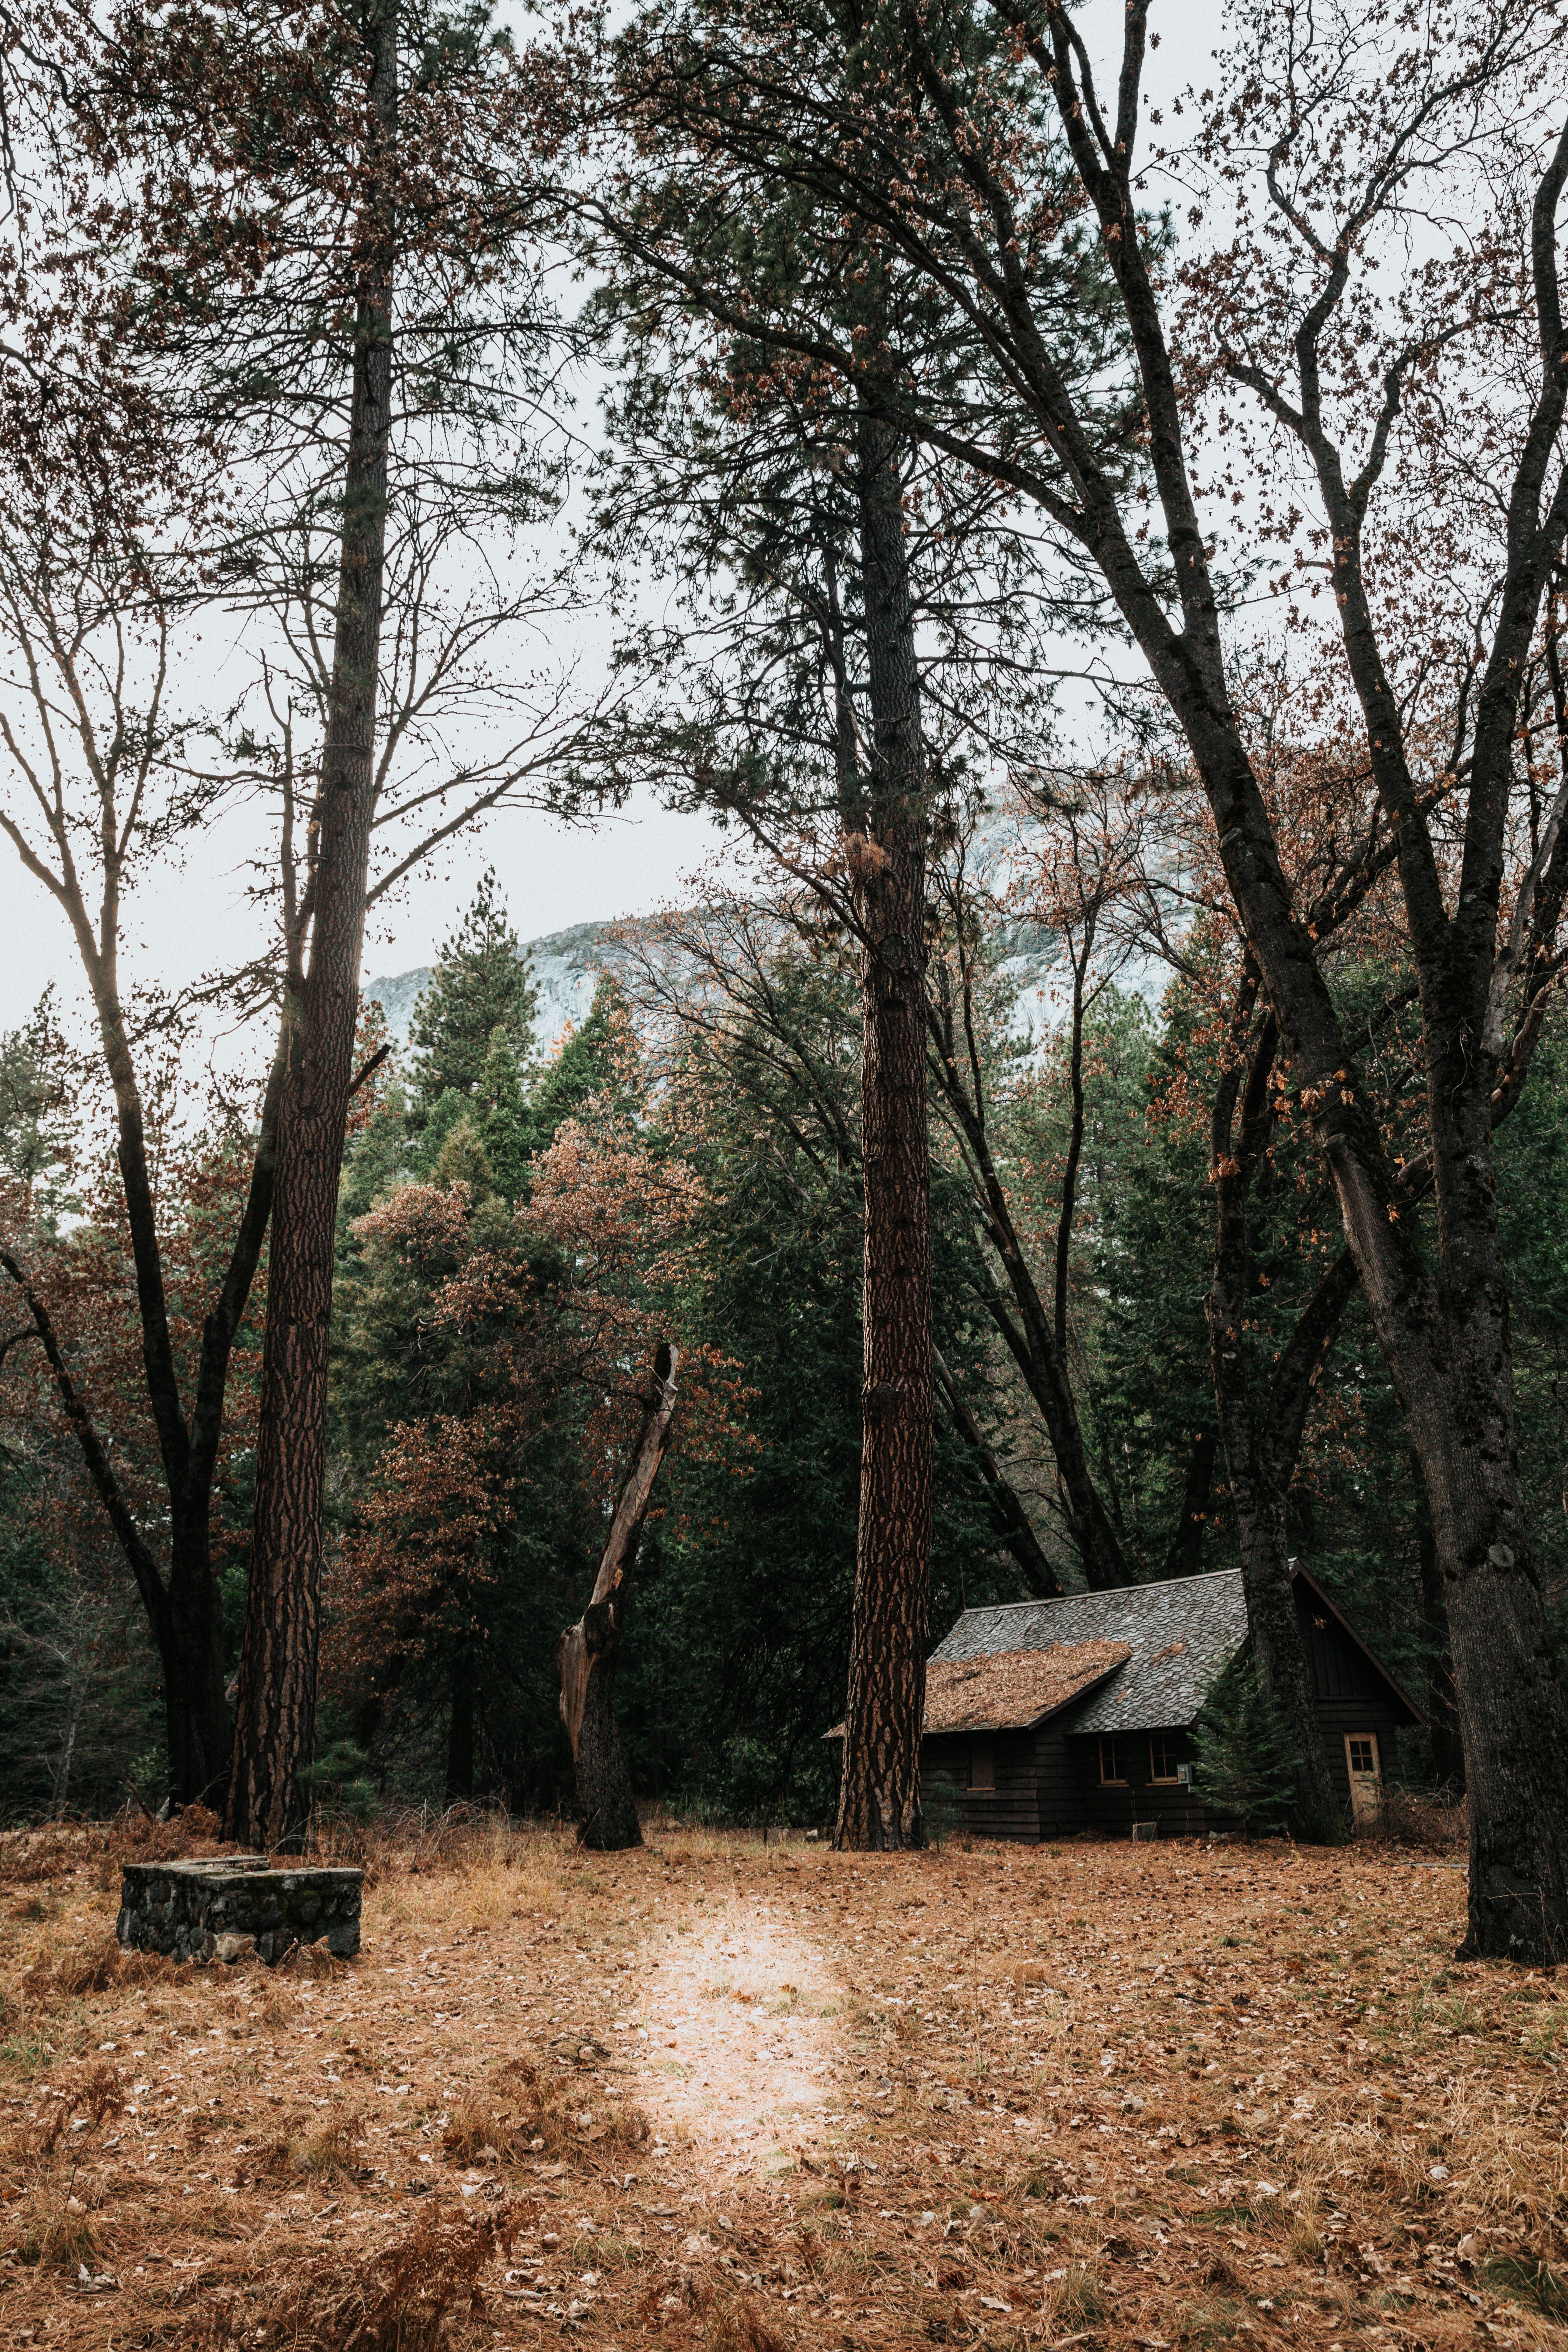 Luke found shelter in a cabin in the woods. | Source: Unsplash